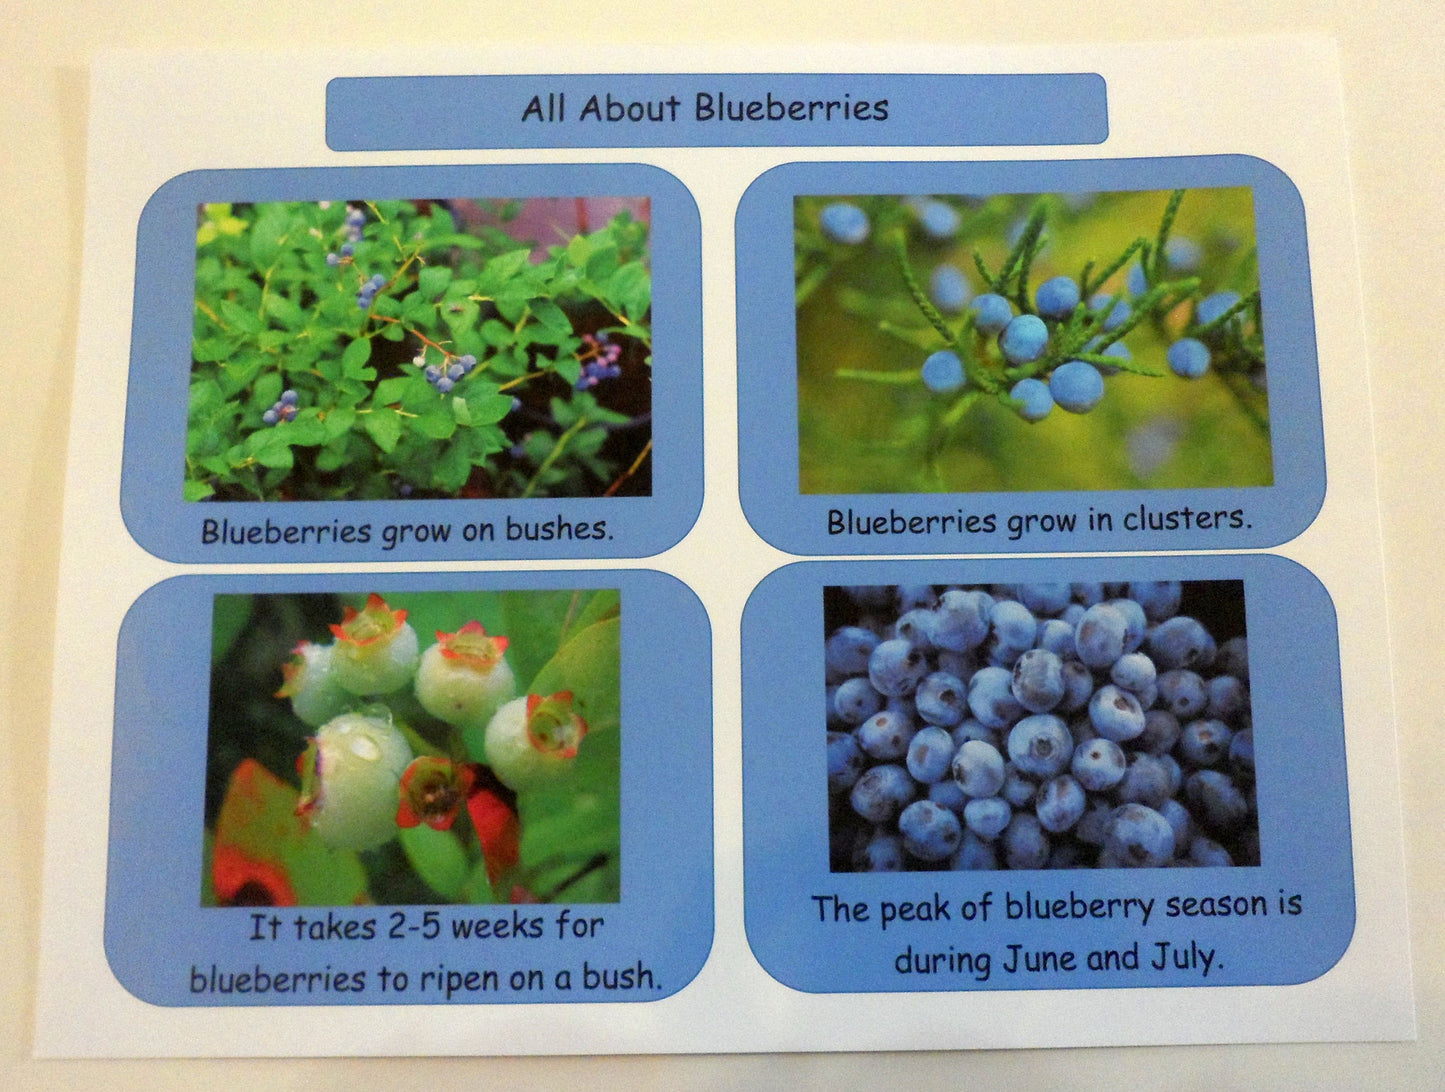 Blueberry facts - Blueberries For Sal by Robert McCloskey - Ivy Kids subscription box activities.